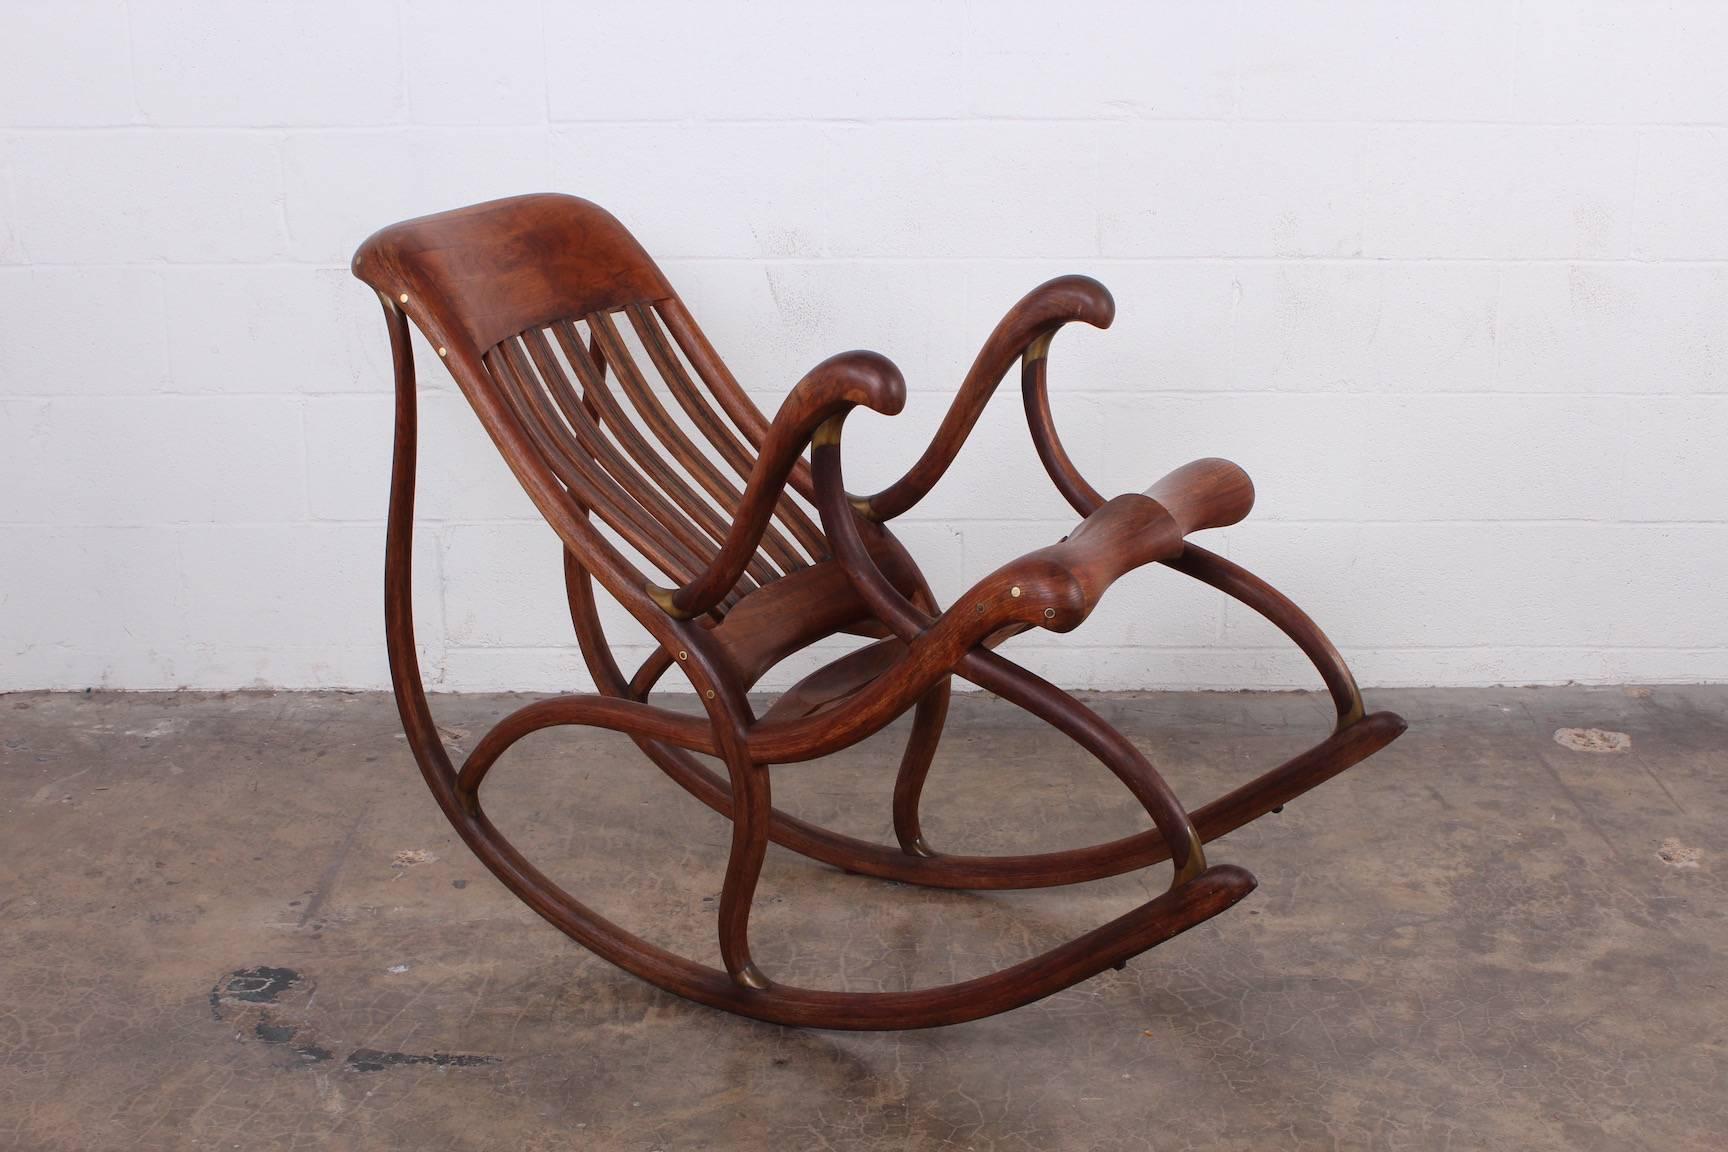 A beautifully crafted walnut rocking chair with bronze details. Crafted by David Crawford, 1988.